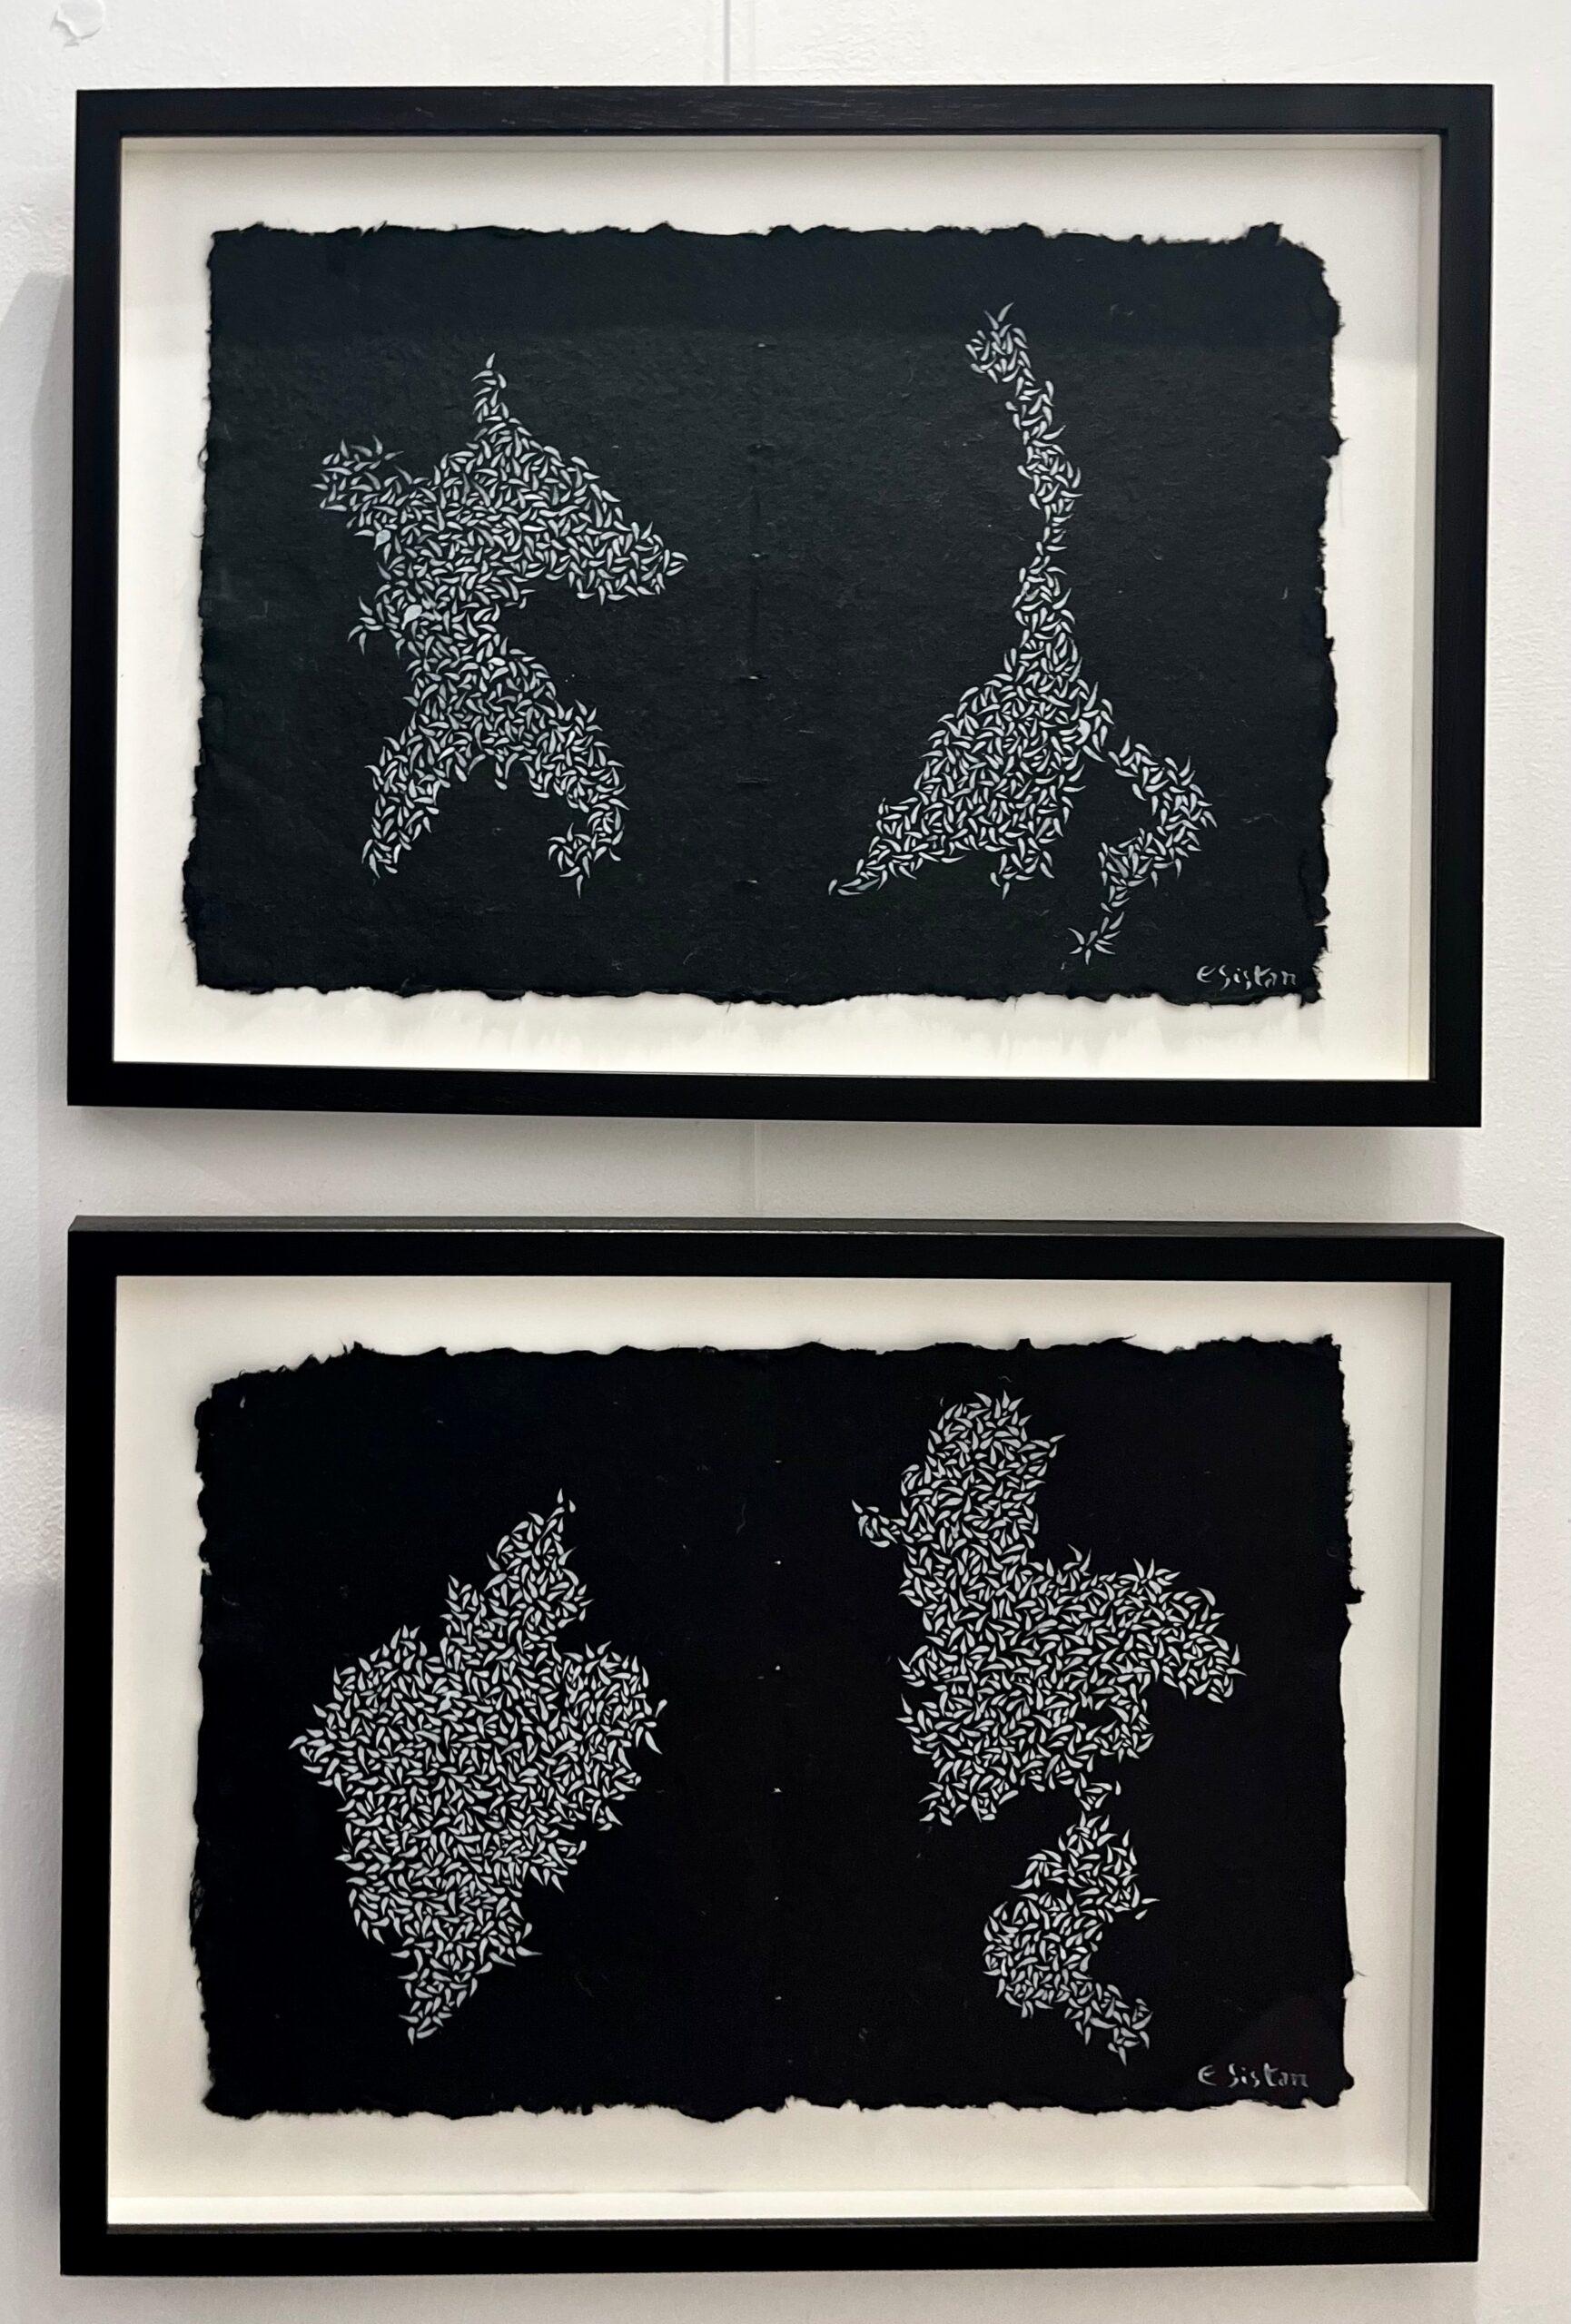 Rorschach Theme - Diptych by E Sistan - Painting by Unknown